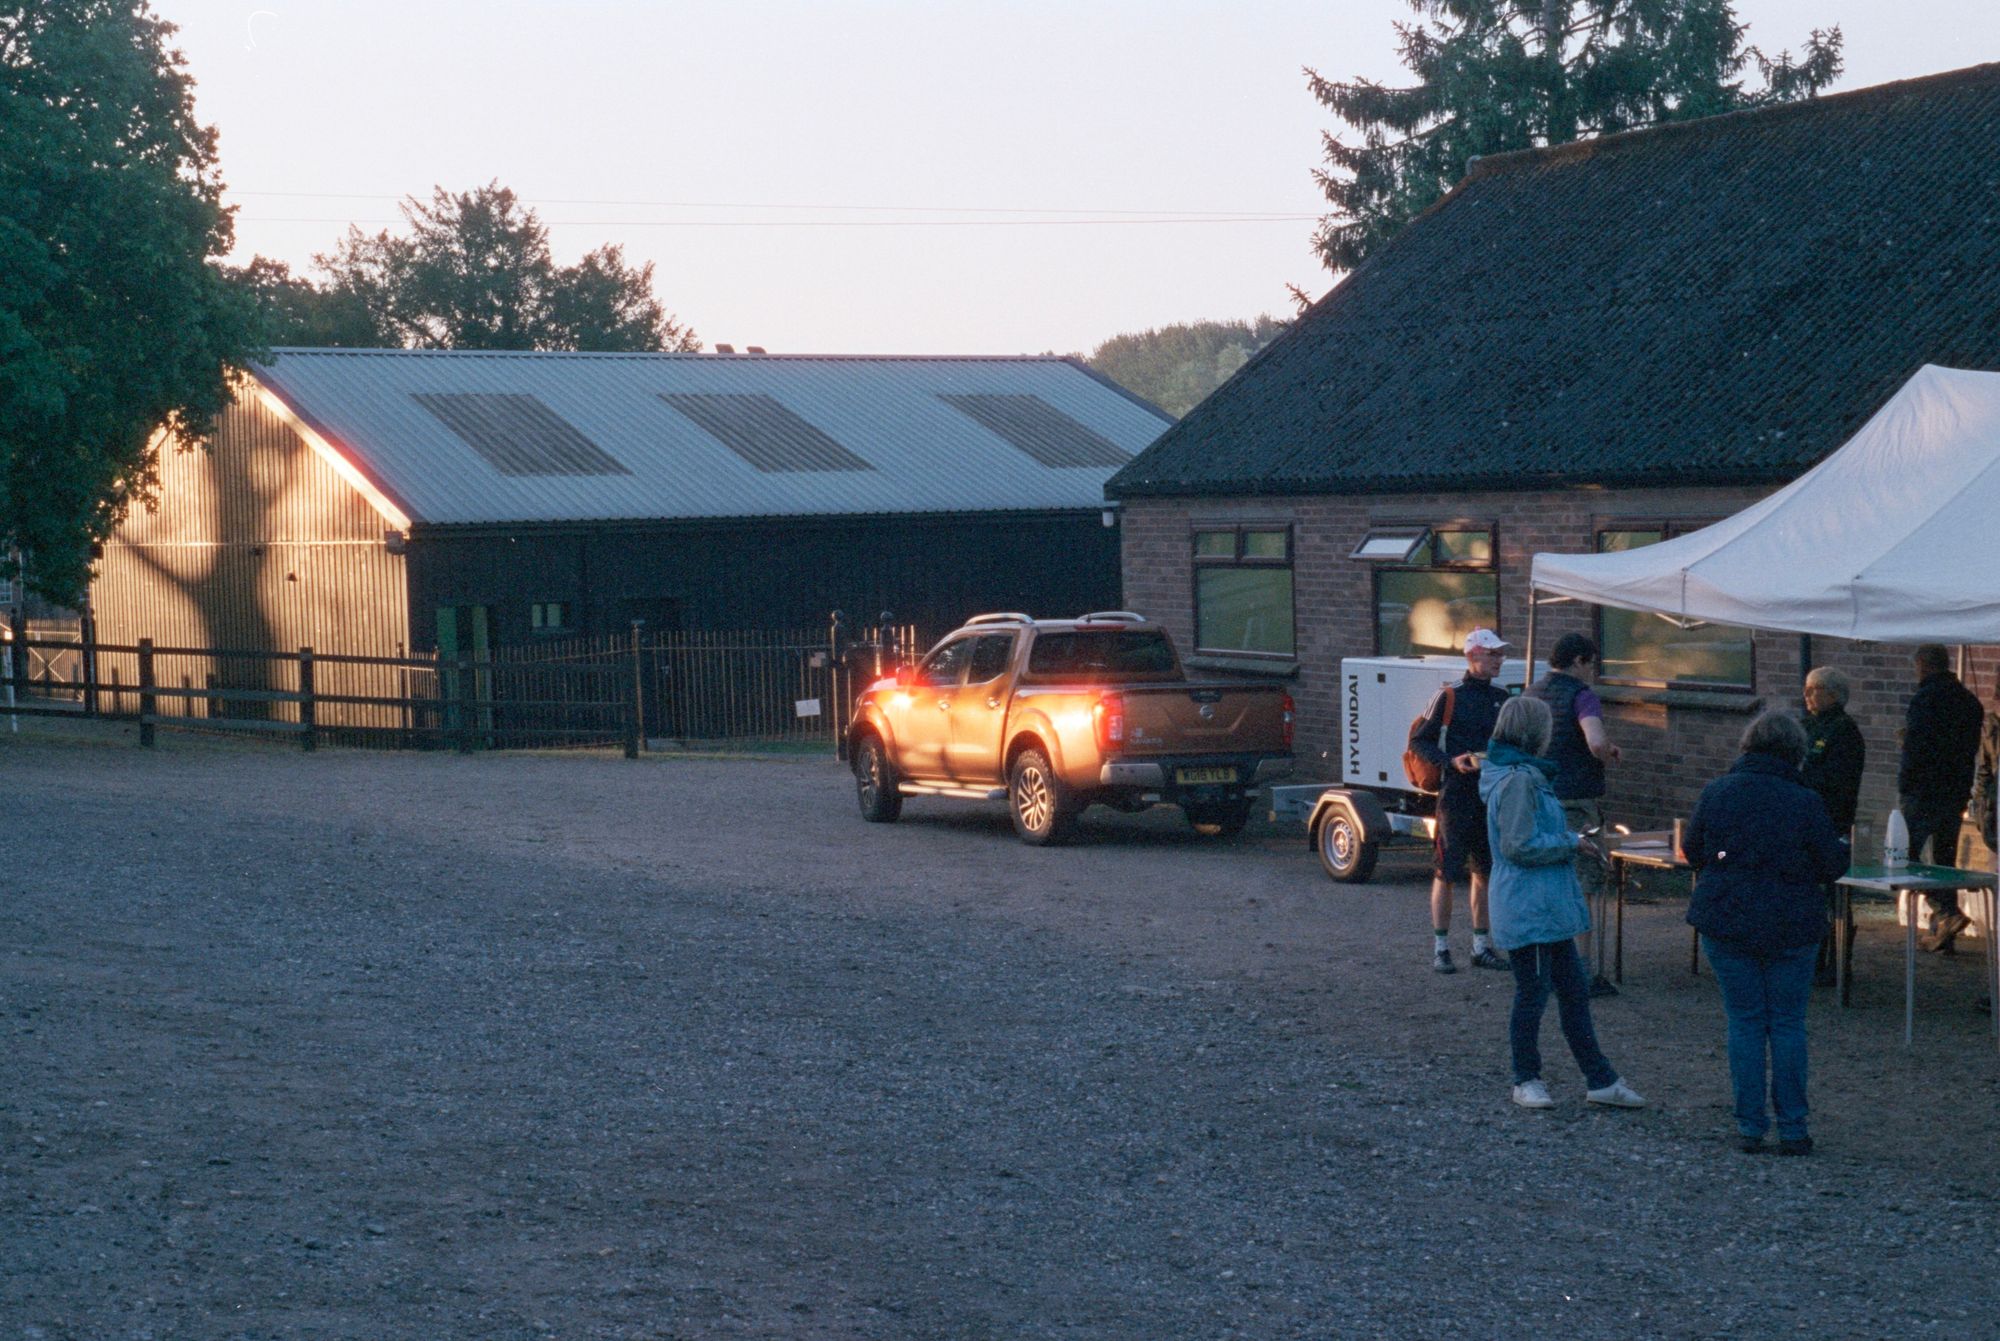 People line up and wait by a gazebo with a table. Sunlight shines on an orange pickup truck which glows in response, and a barn which has the shadow of a tree cast on its corrugated walls.